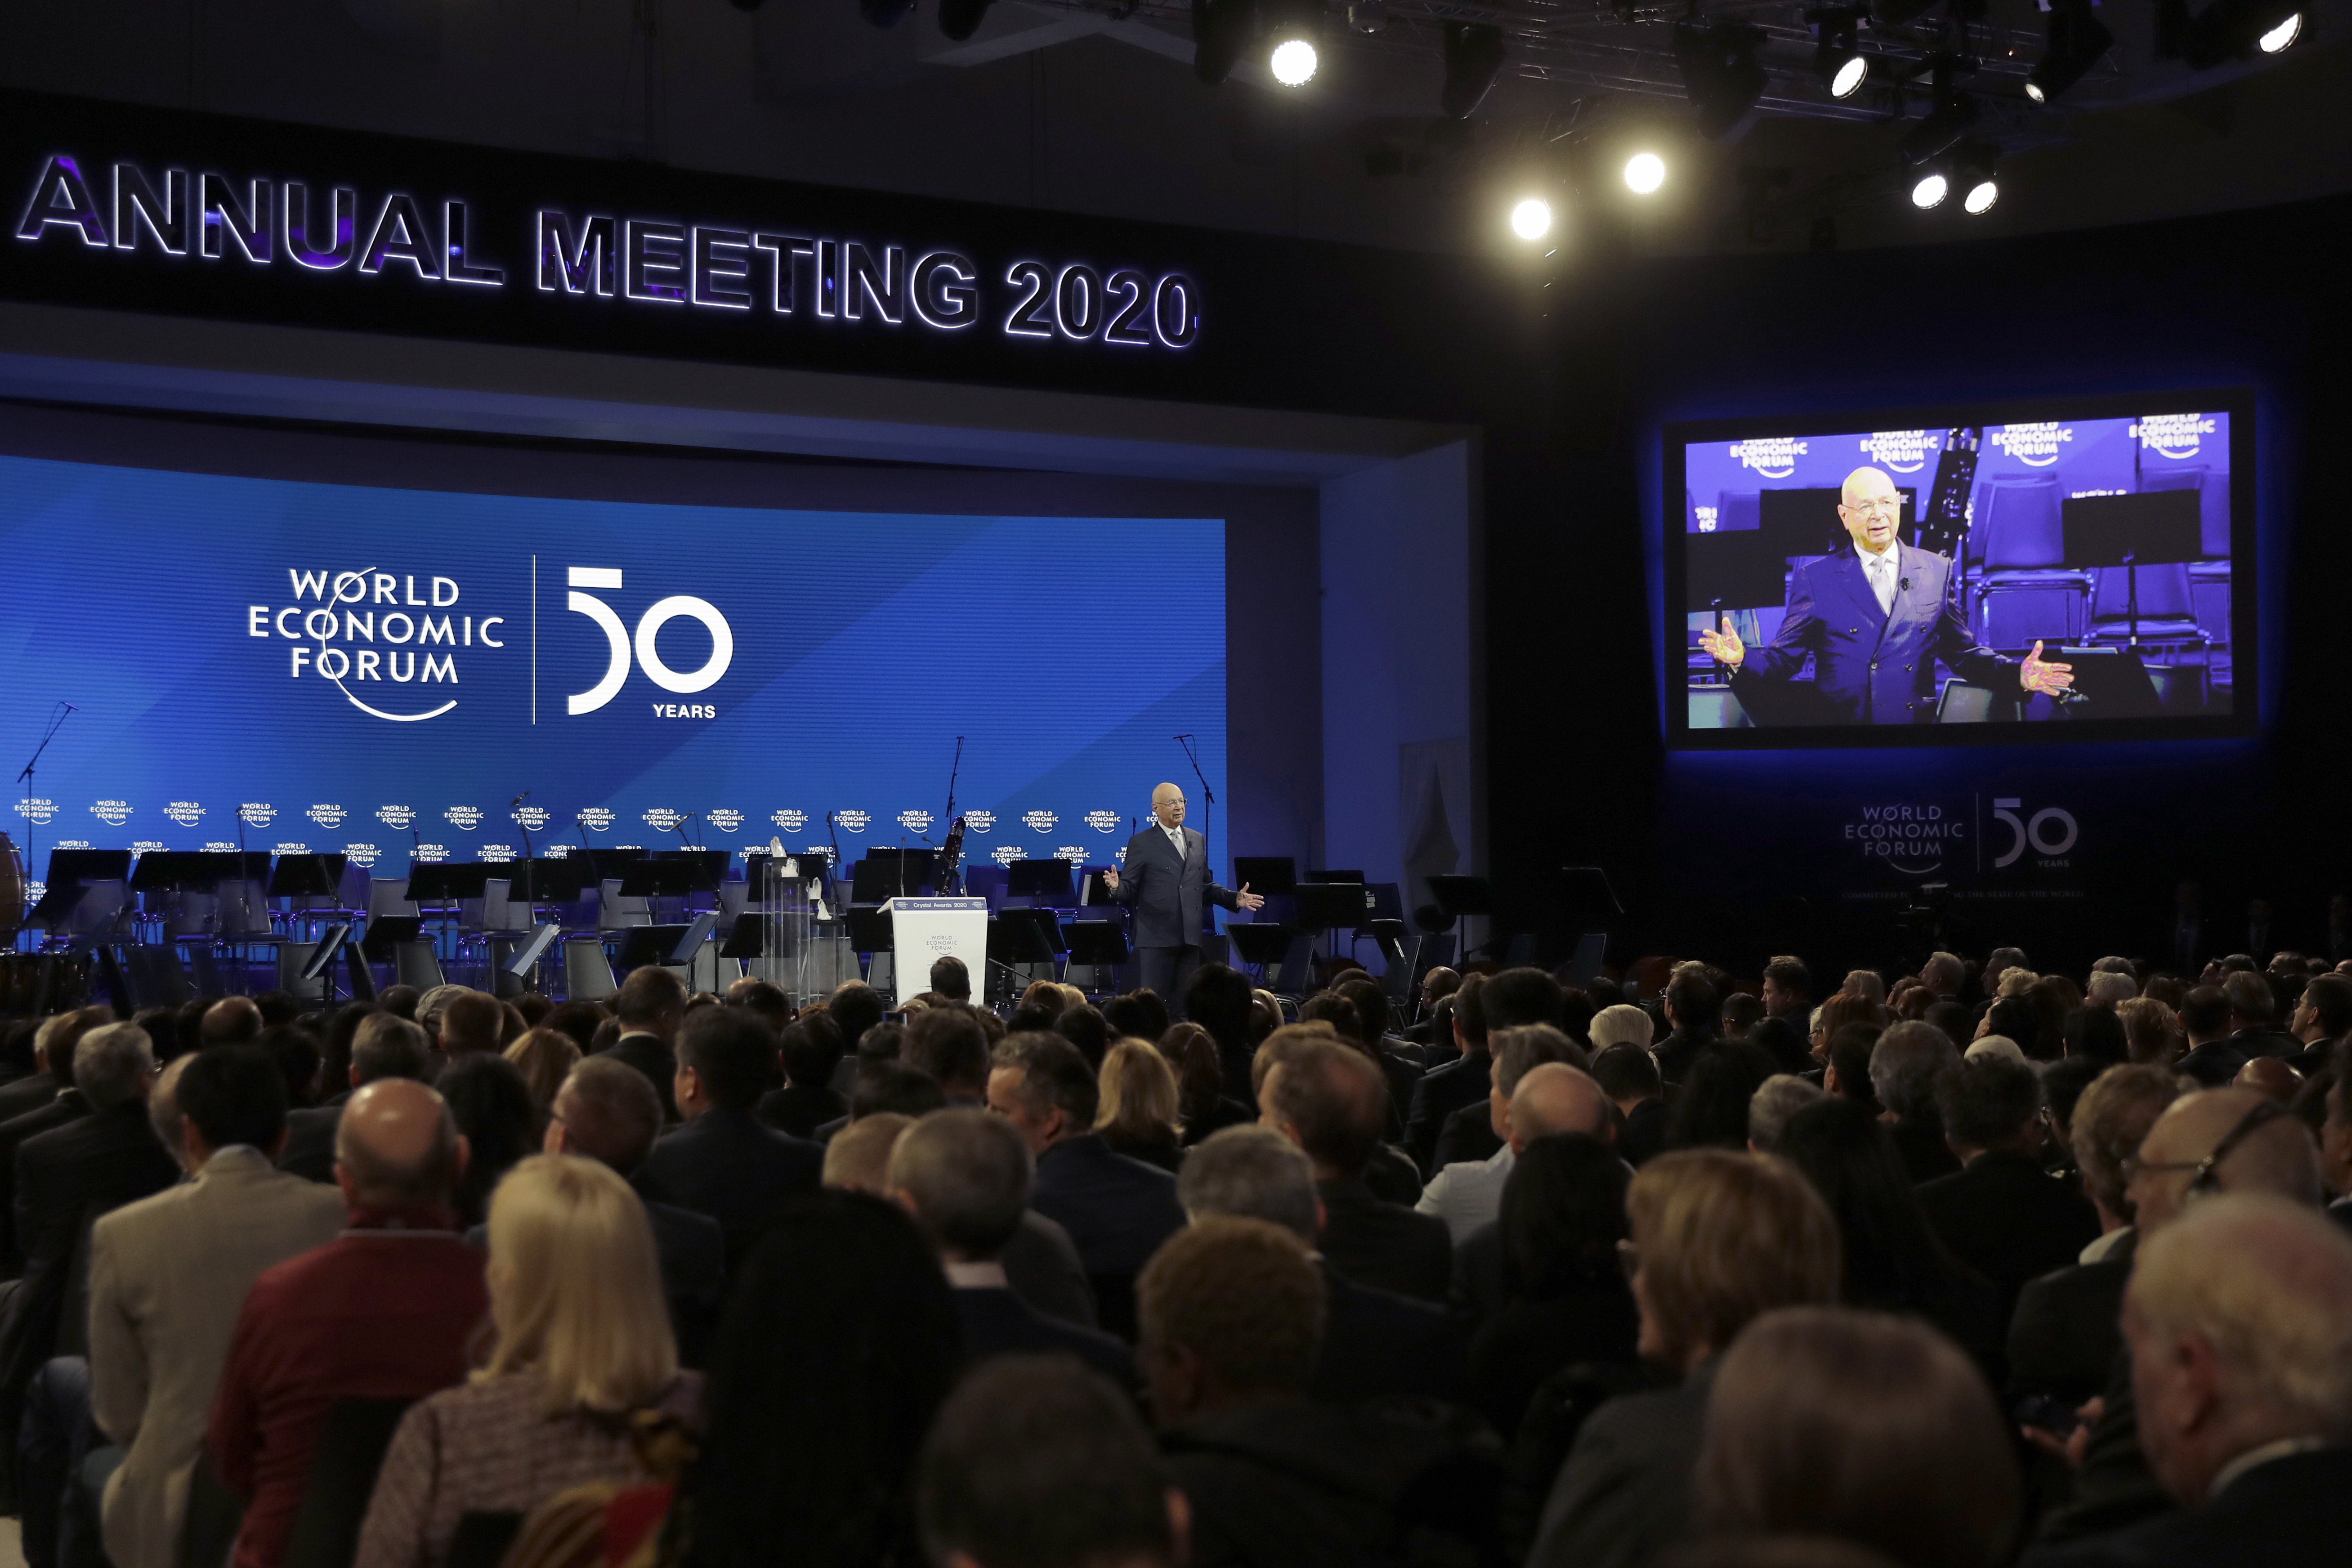 Klaus Schwab, founder of the World Economic Forum, delivers a welcome message on the eve of the annual meeting of the World Forum in Davos, Switzerland, Monday, Jan. 20, 2020. The 50th annual meeting of the forum will take place in Davos from Jan. 21 until Jan. 24, 2020. (AP Photo/Markus Schreiber)